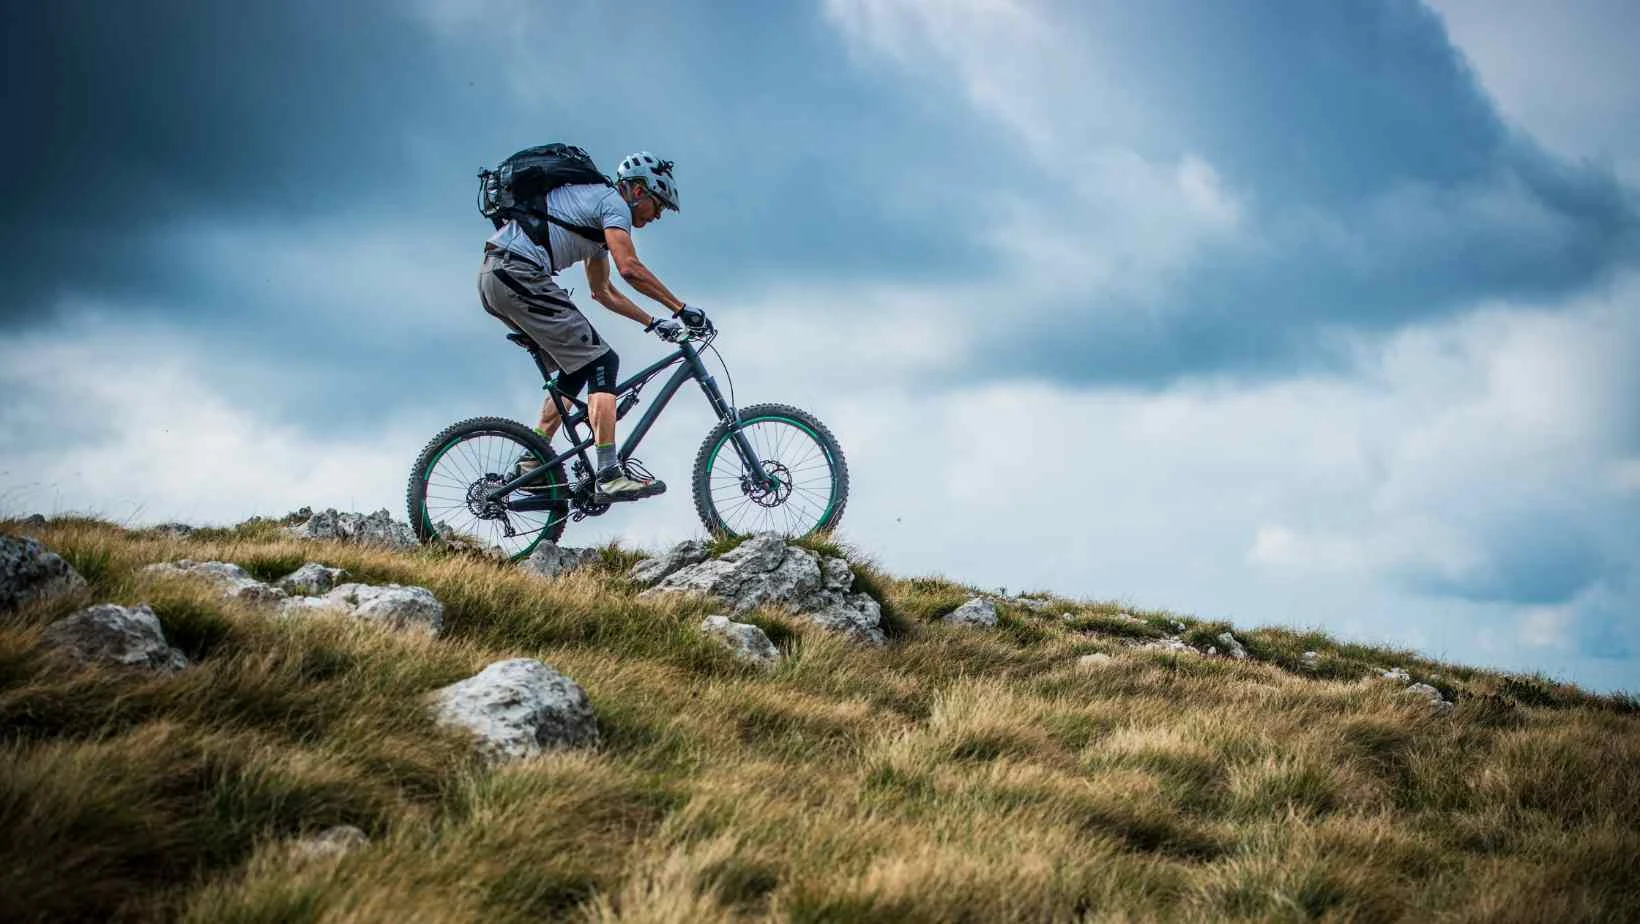 A man on a mountain bike, stock image from Canva pro